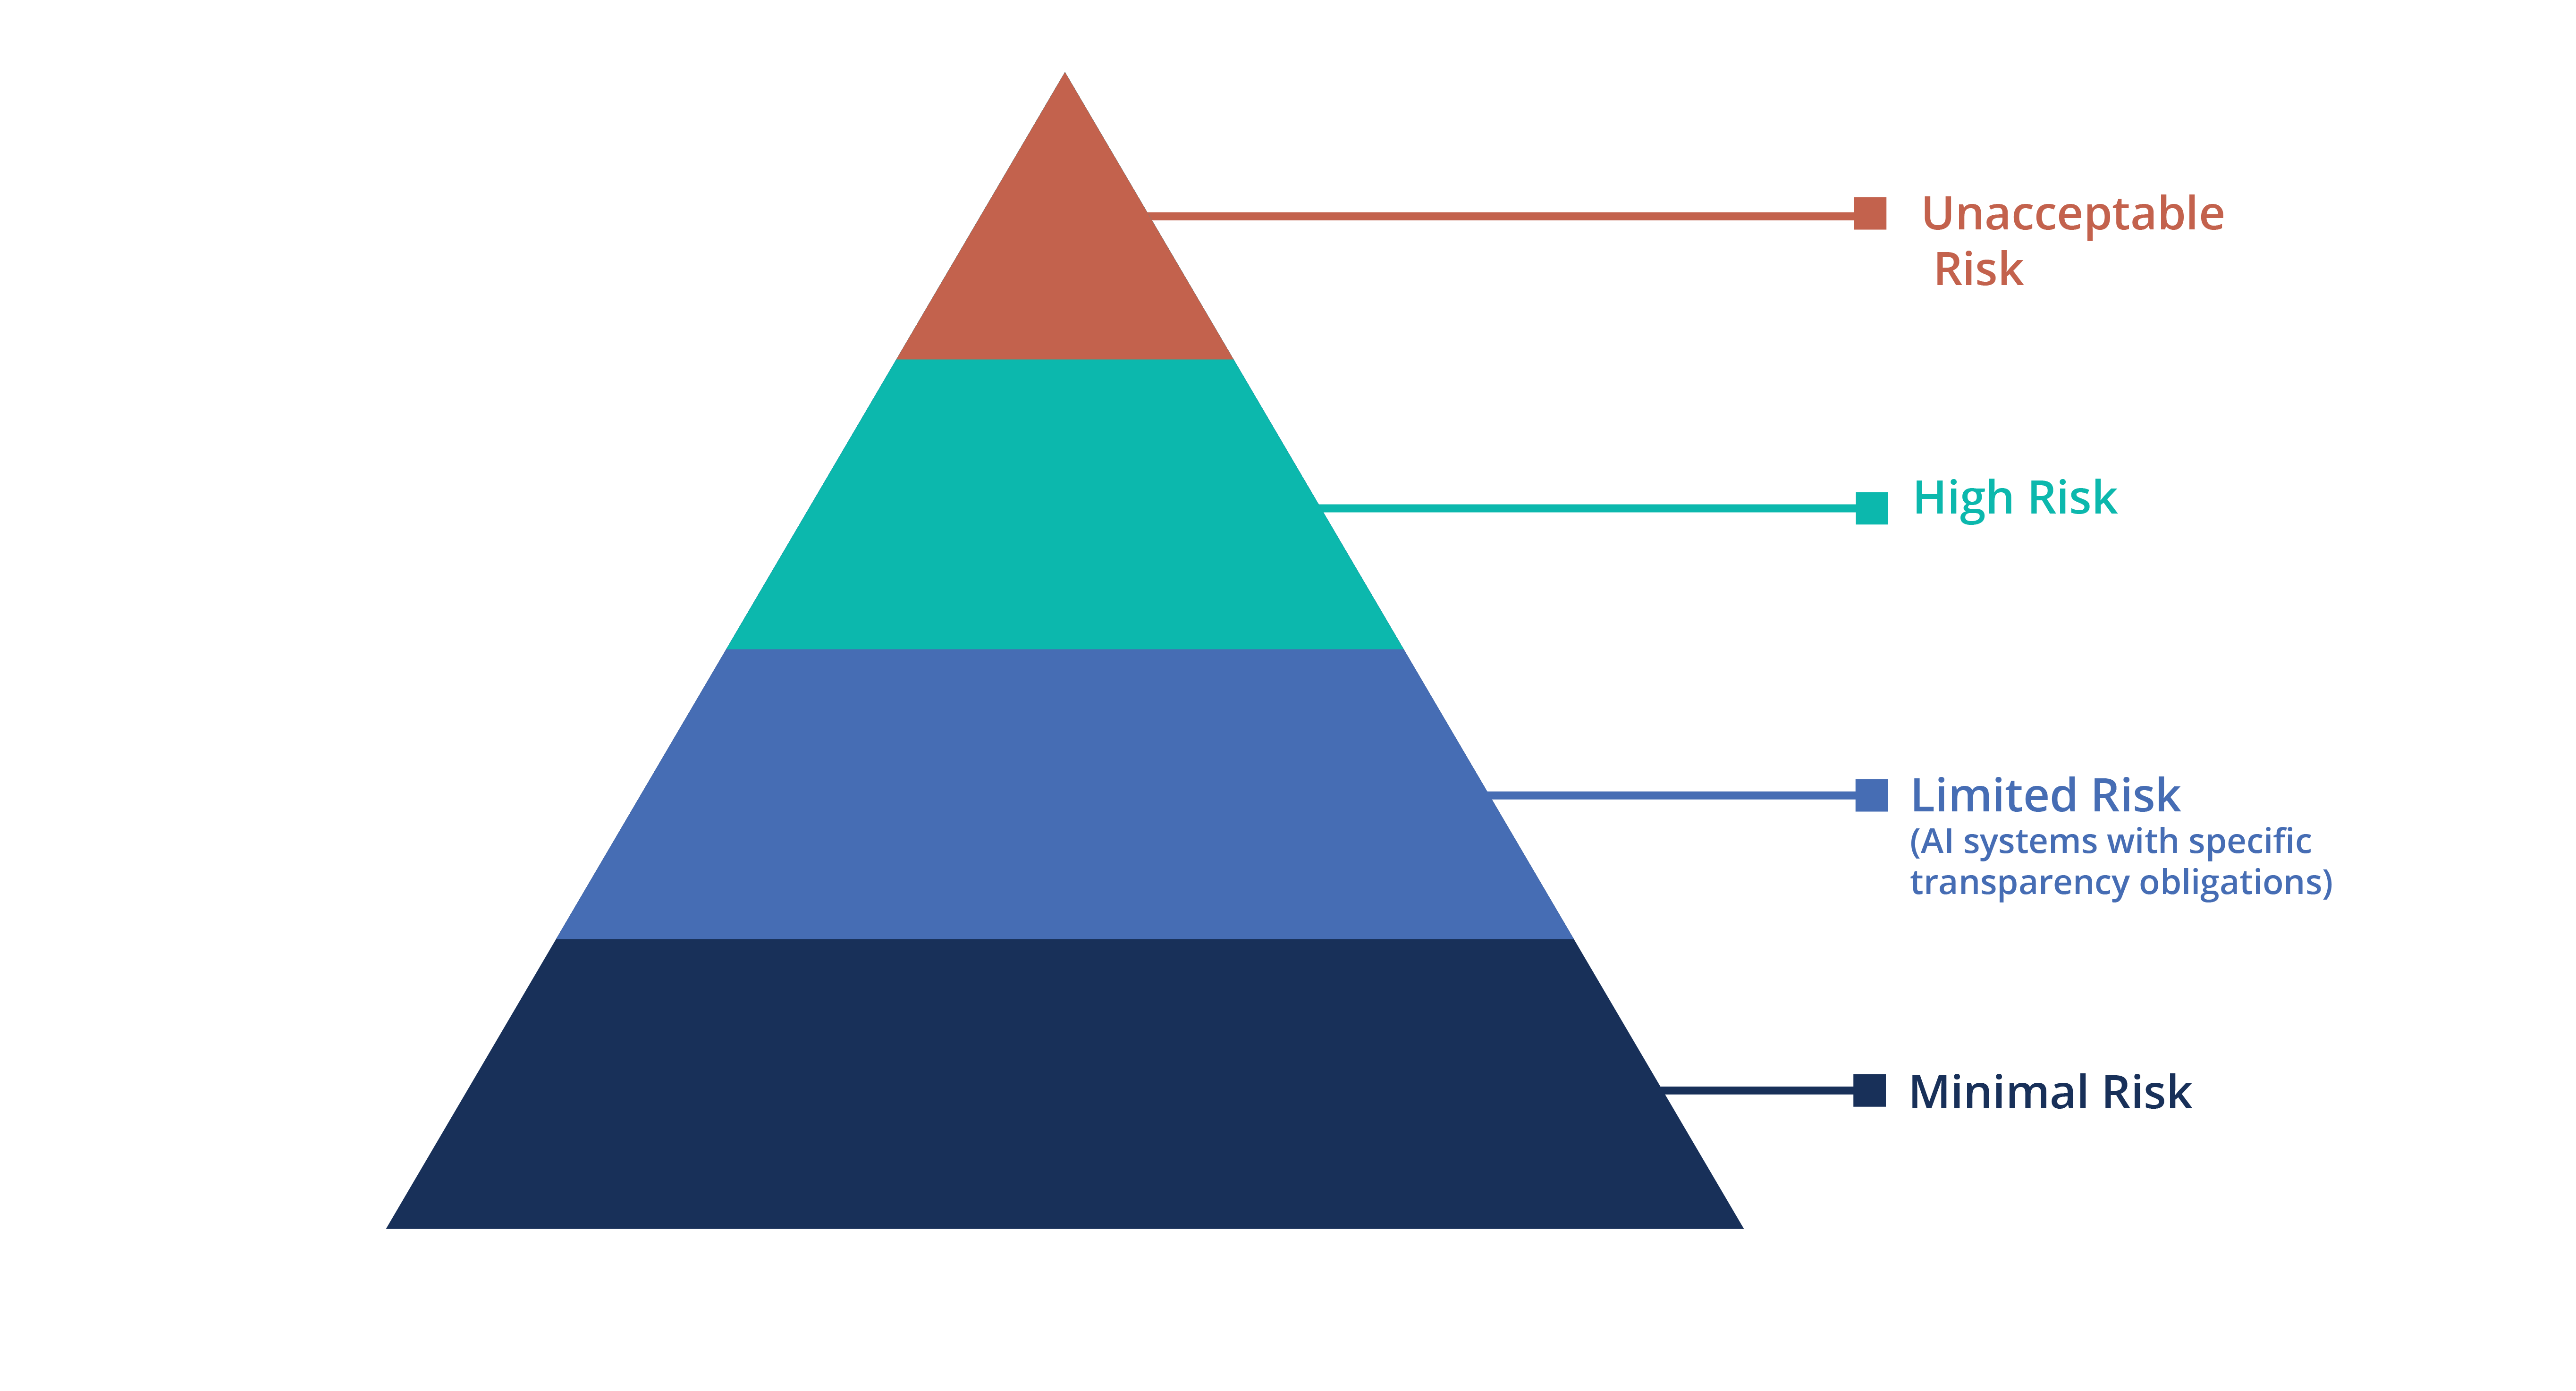 The AI risk pyramid. Unacceptable risk is at the top, followed by High Risk. Limited Risk (AI systems with specific transparency obligations) comes next, with Minimal Risk at the bottom.